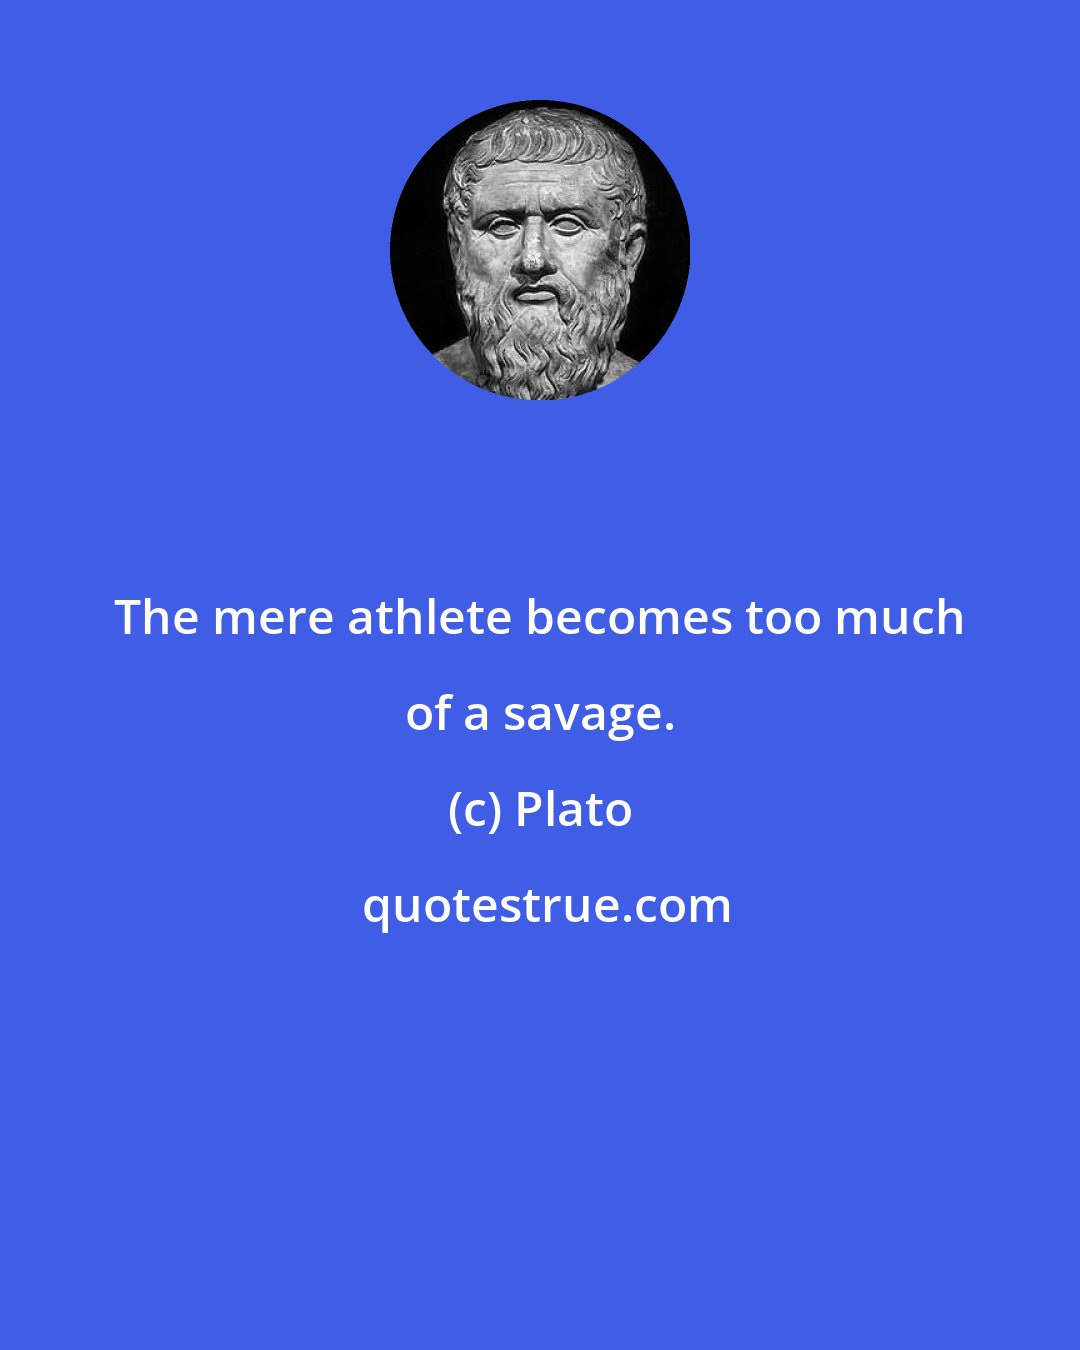 Plato: The mere athlete becomes too much of a savage.